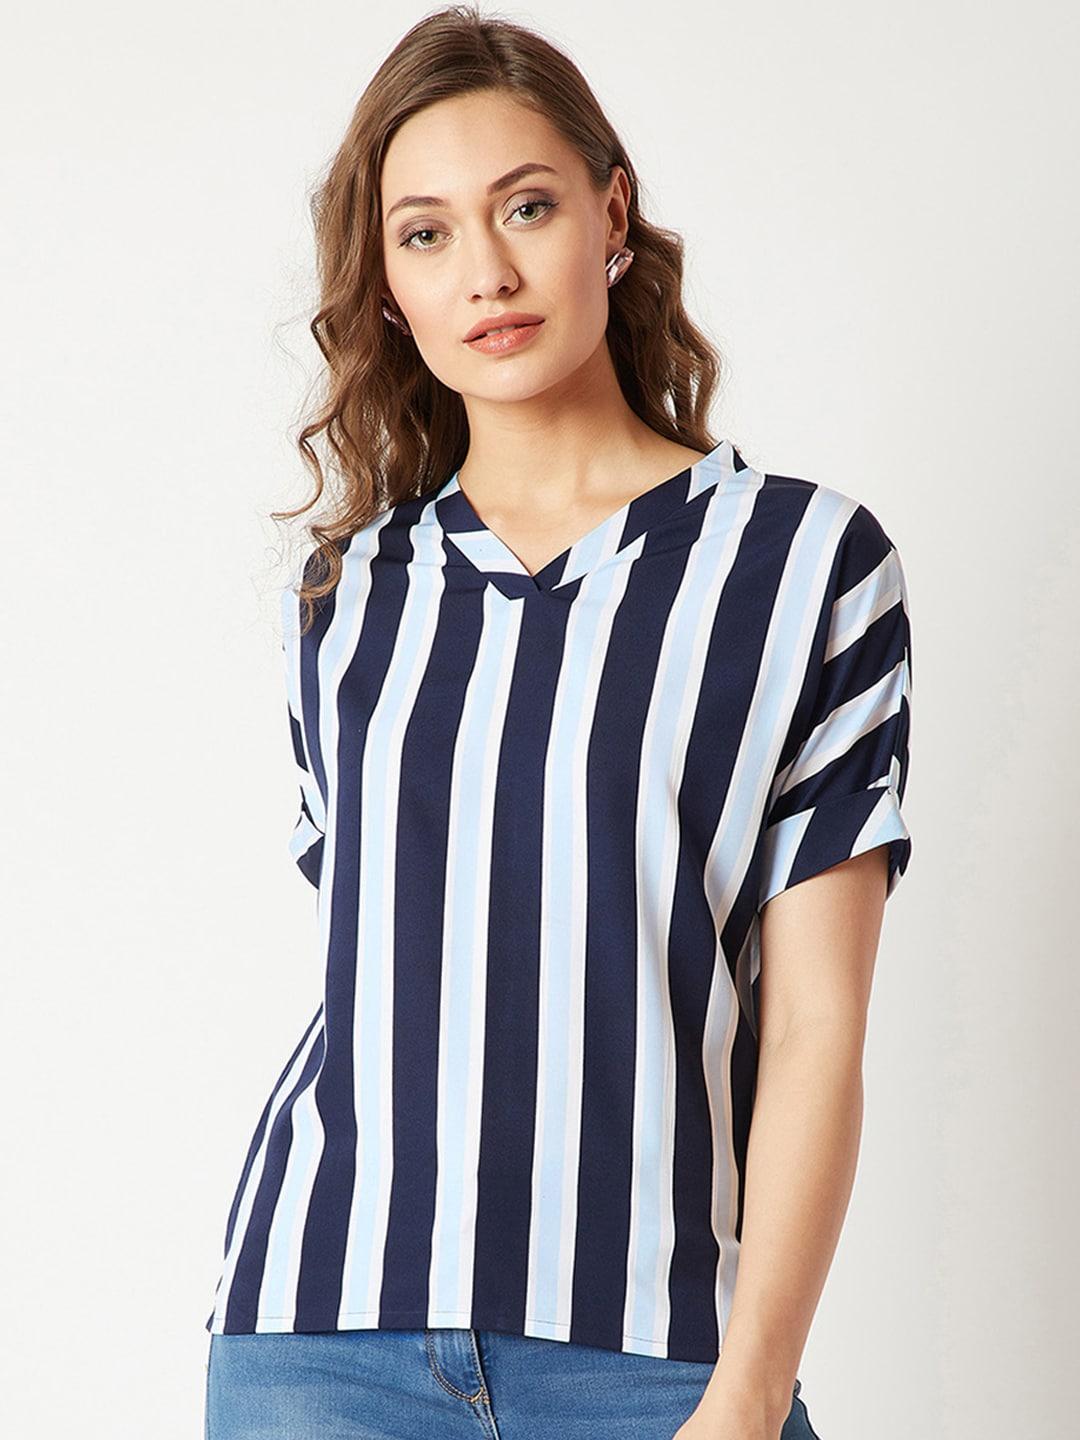 miss-chase-women-navy-blue-striped-top